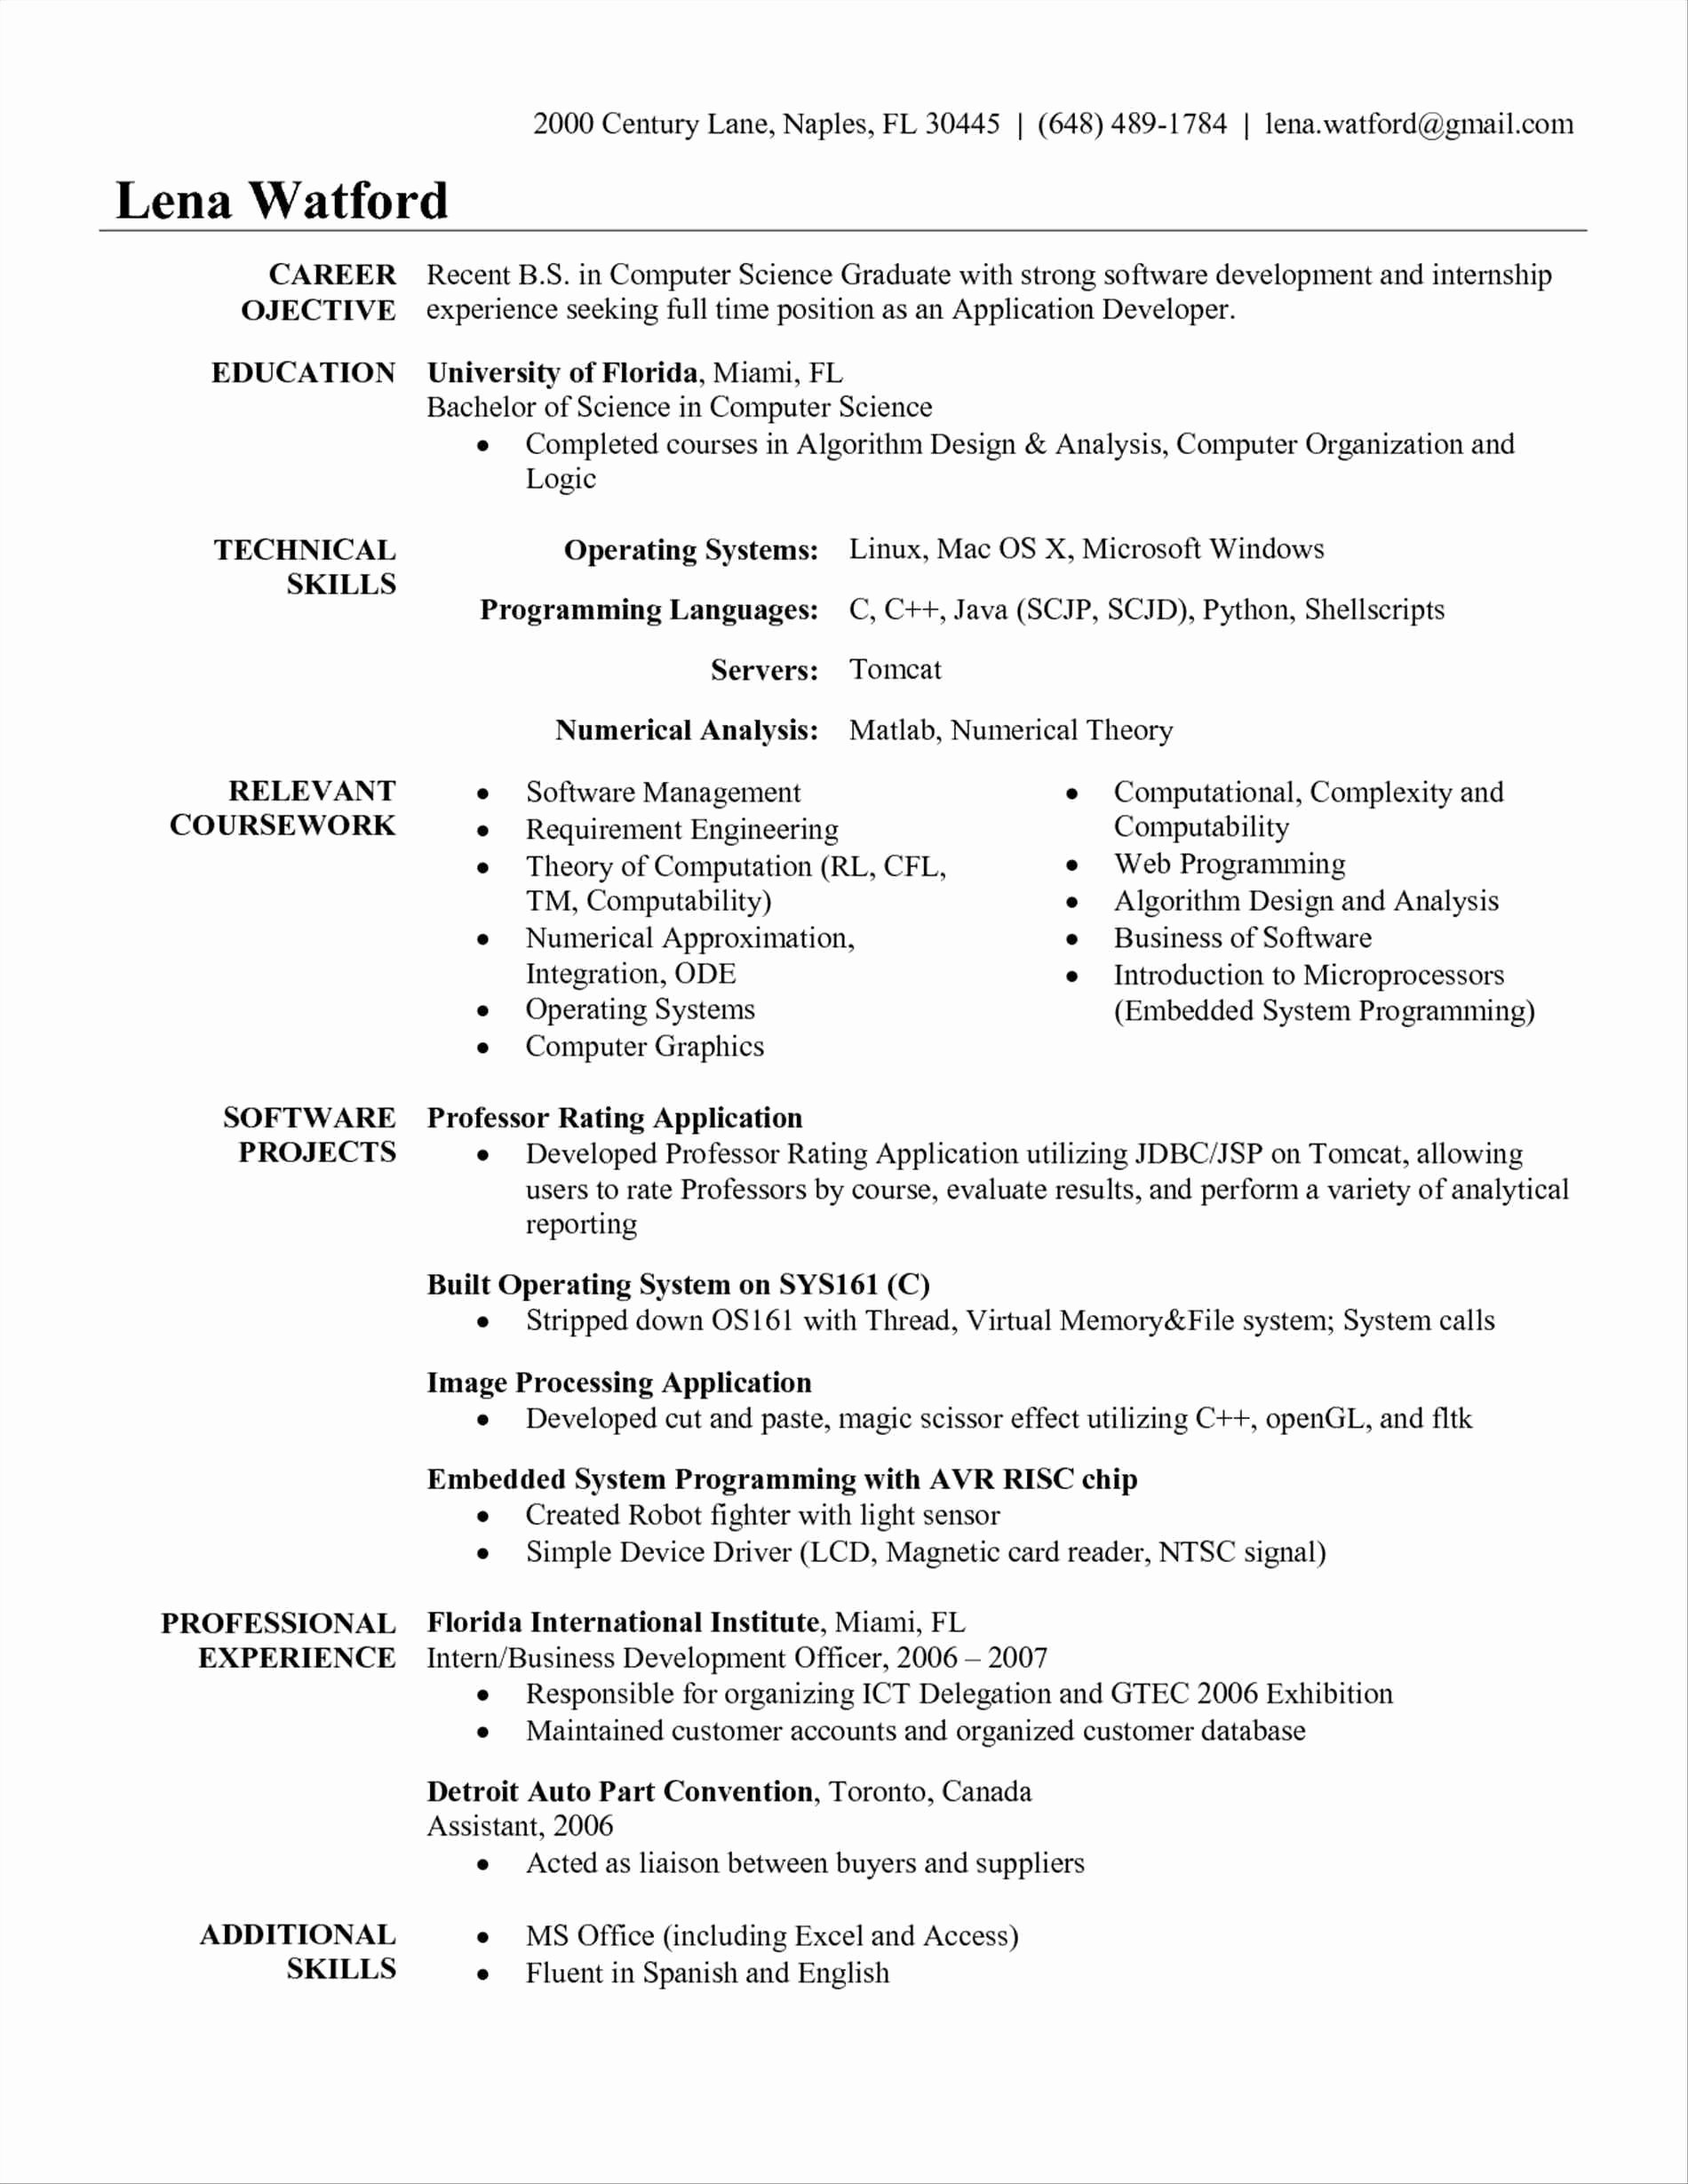 Sample Resume for software Engineer with 2 Years